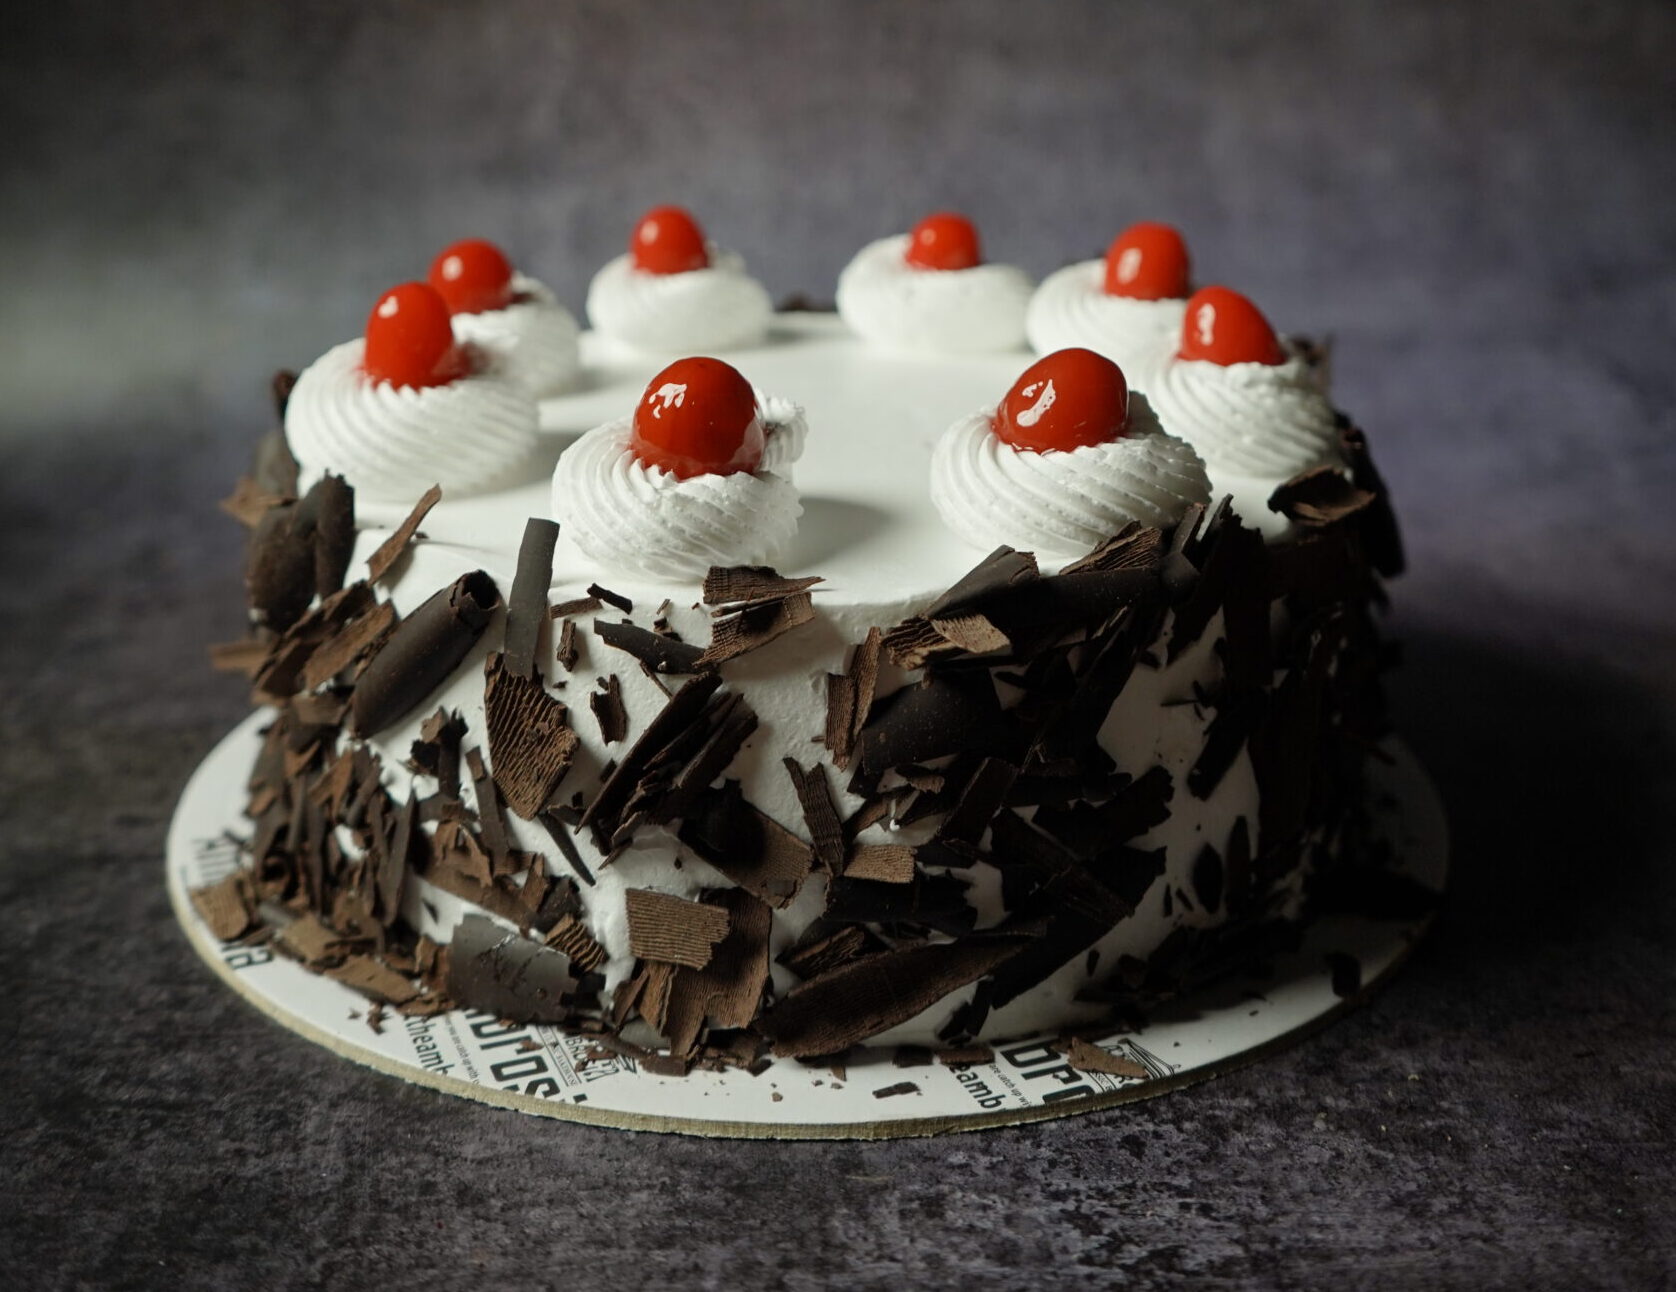 Reasons For Online Black Forest Cake Sg Delivery: Top Benefits